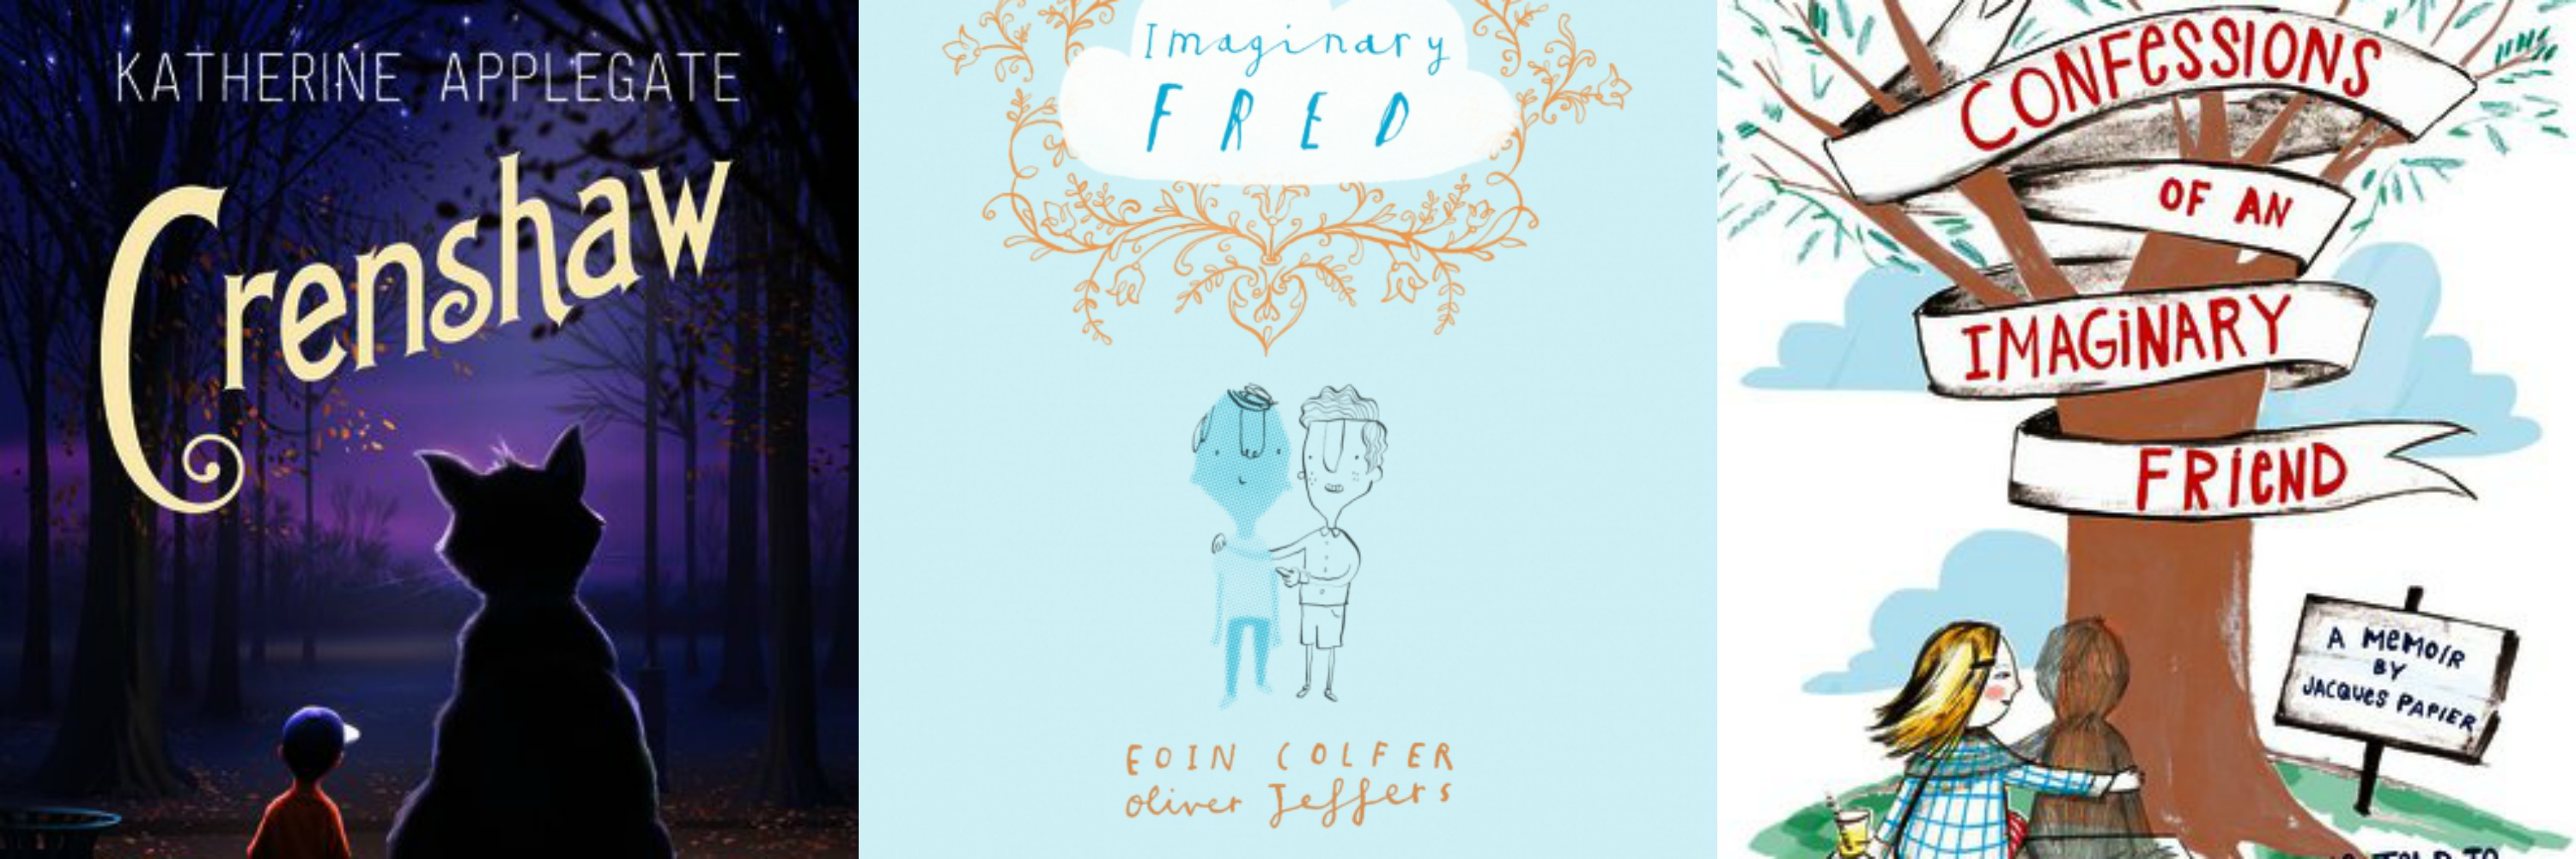 imaginary friend book review